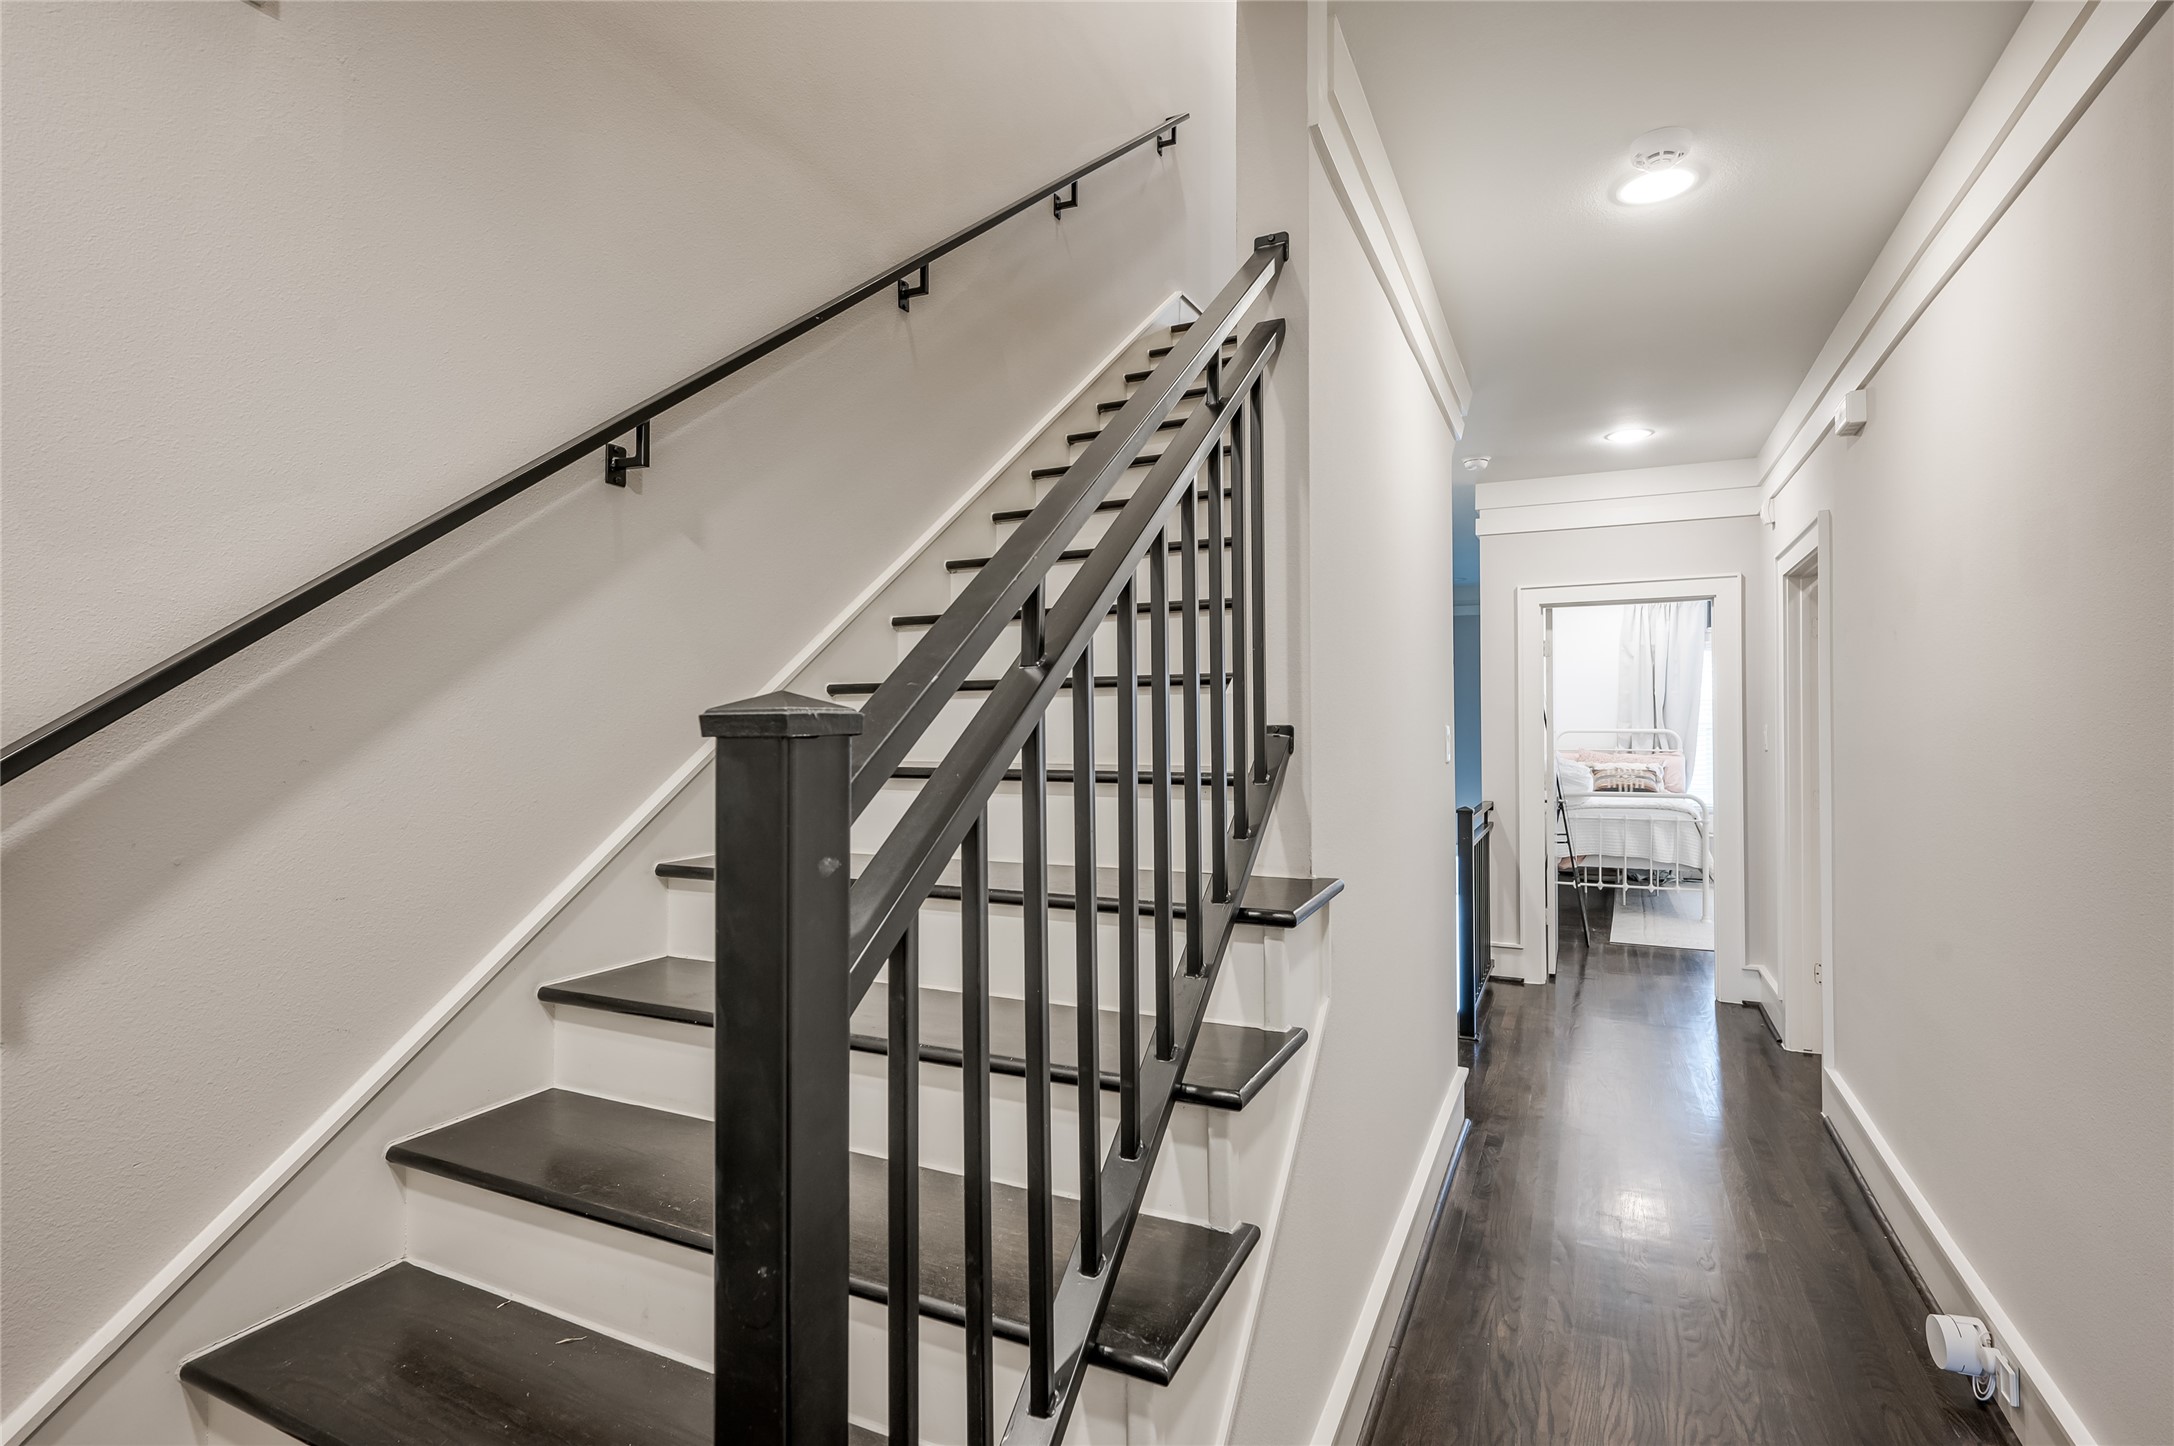 This set of stairs leads to the third floor. Note the handsome metal railing. A neutral palette all around!